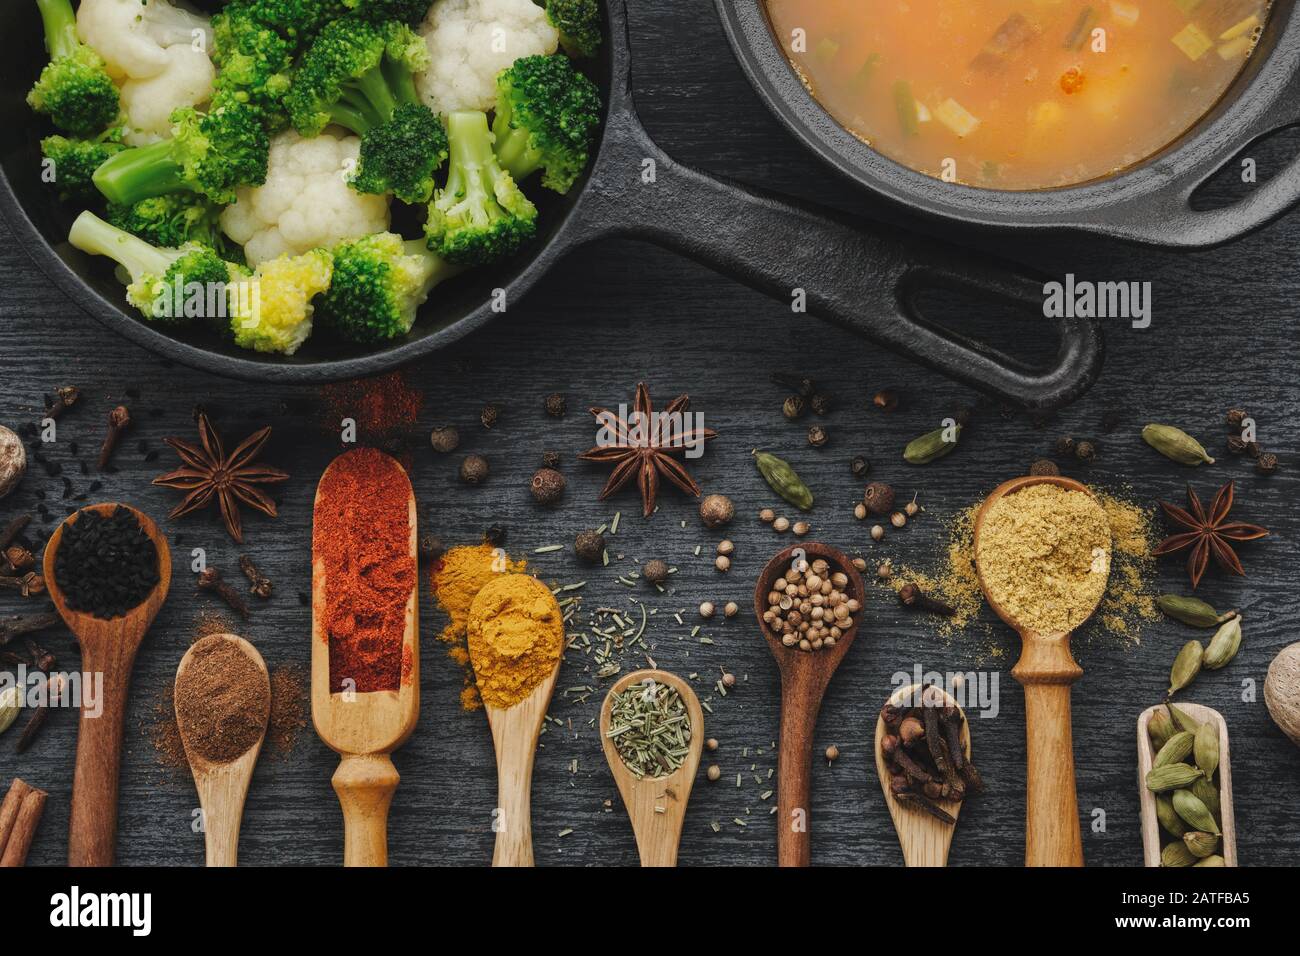 Various aromatic colorful spices and herbs in wooden spoons and scoops. Broccoli and cauliflower on iron frying pan.  Black ceramic saucepan with soup Stock Photo